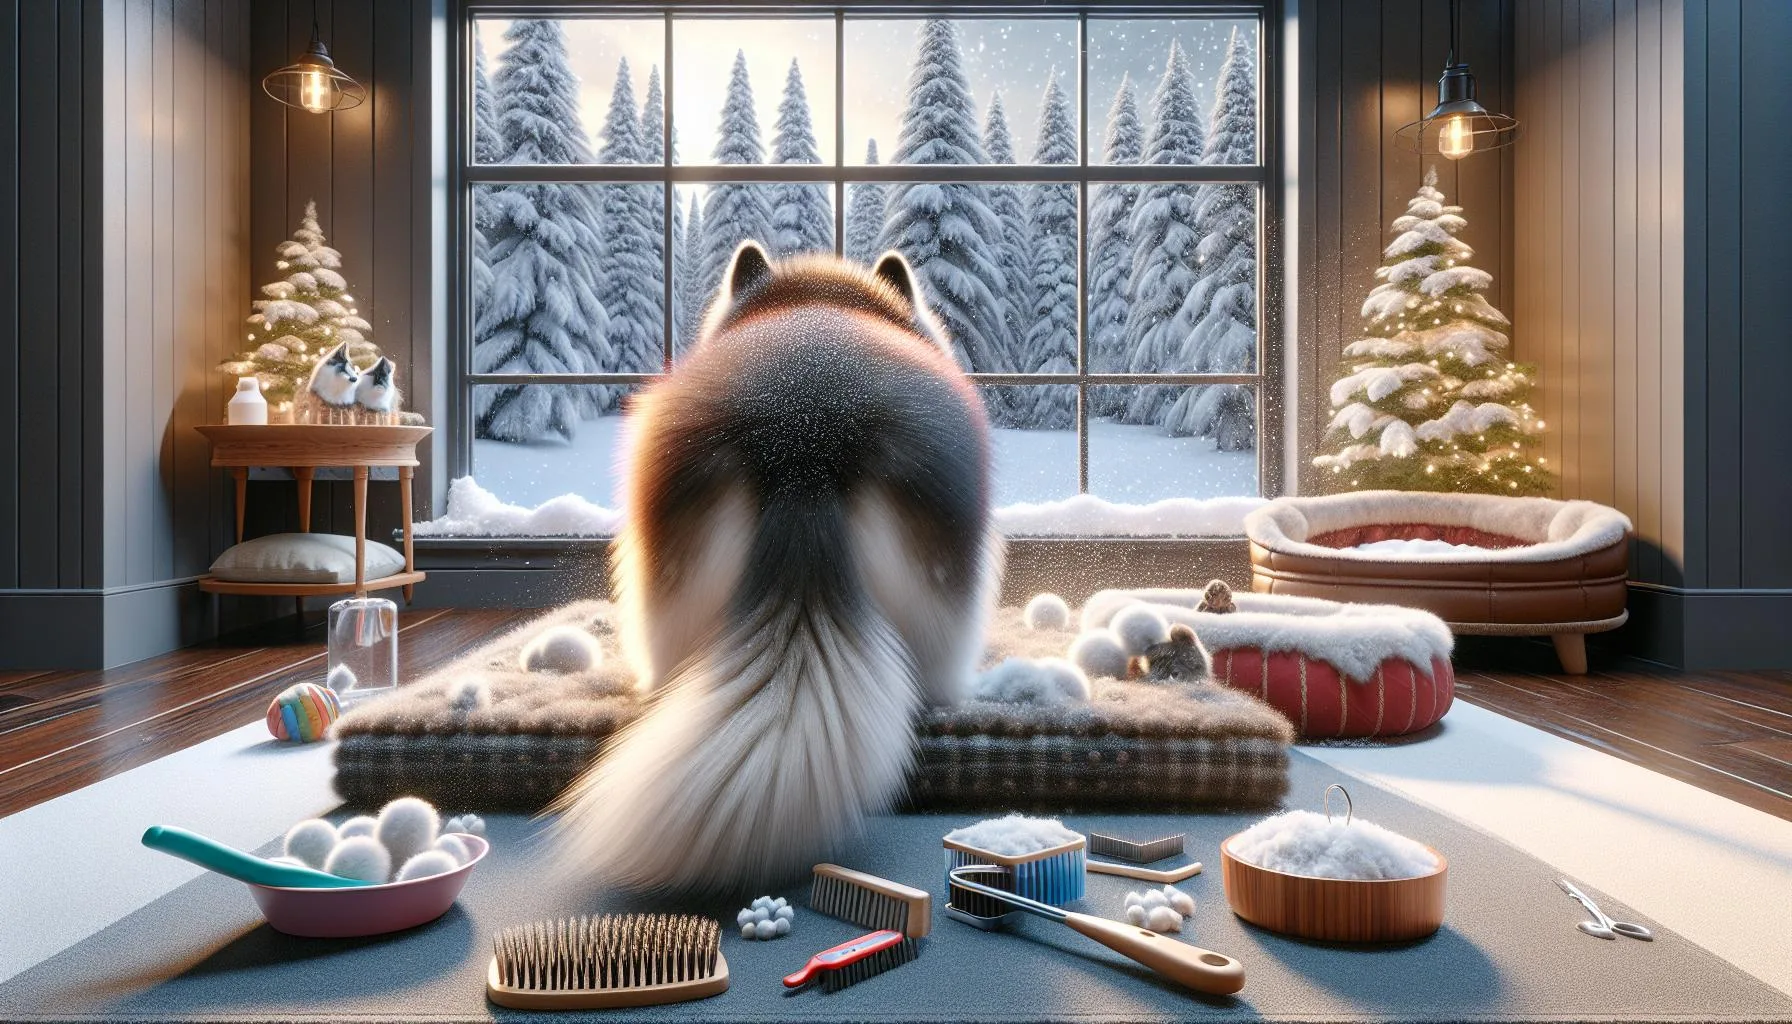 Get Your Husky Ready for Winter with These Grooming Tips!